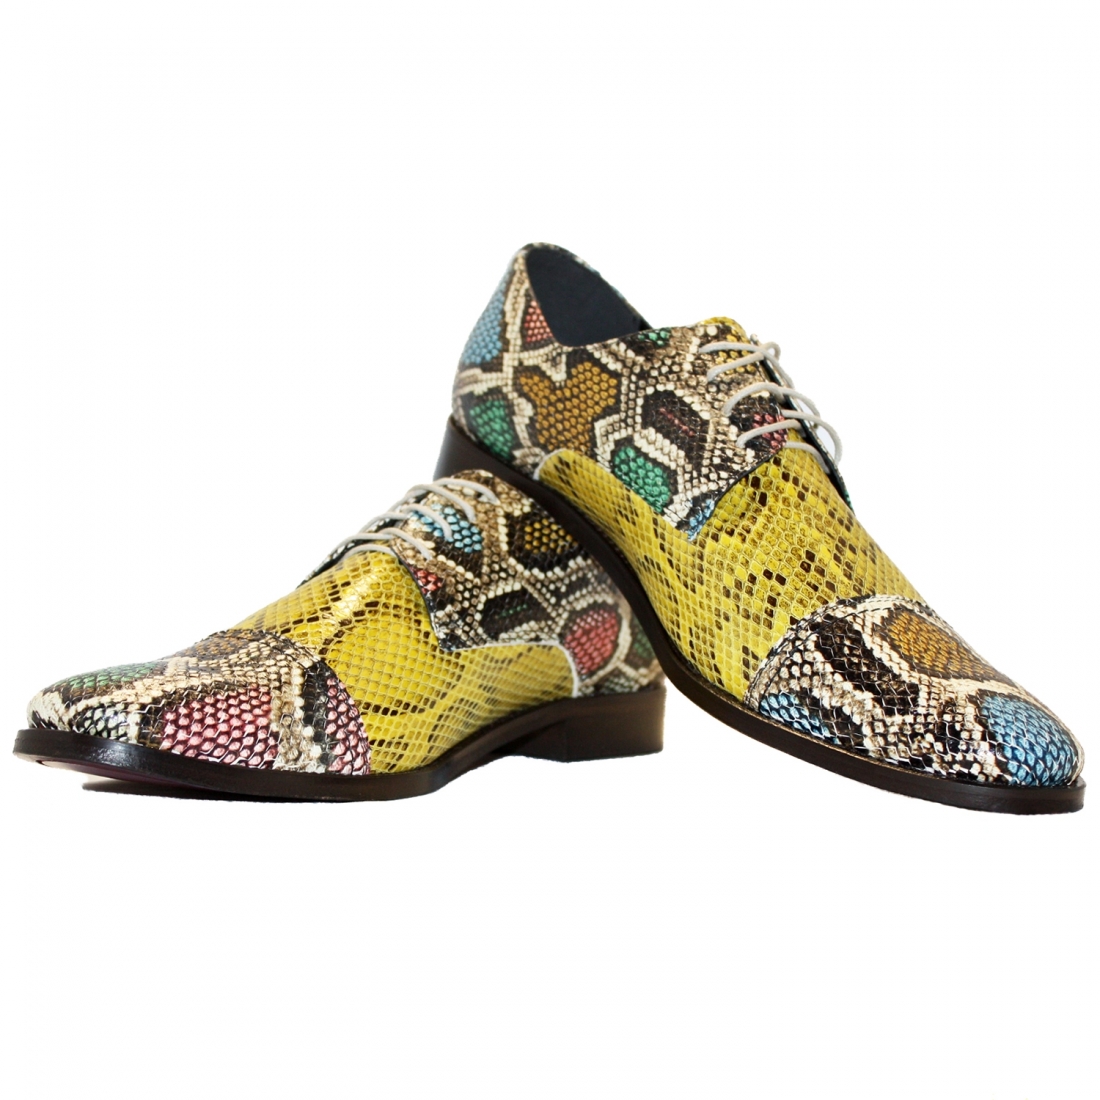 copy of Modello Arosso - Classic Shoes - Handmade Colorful Italian Leather Shoes